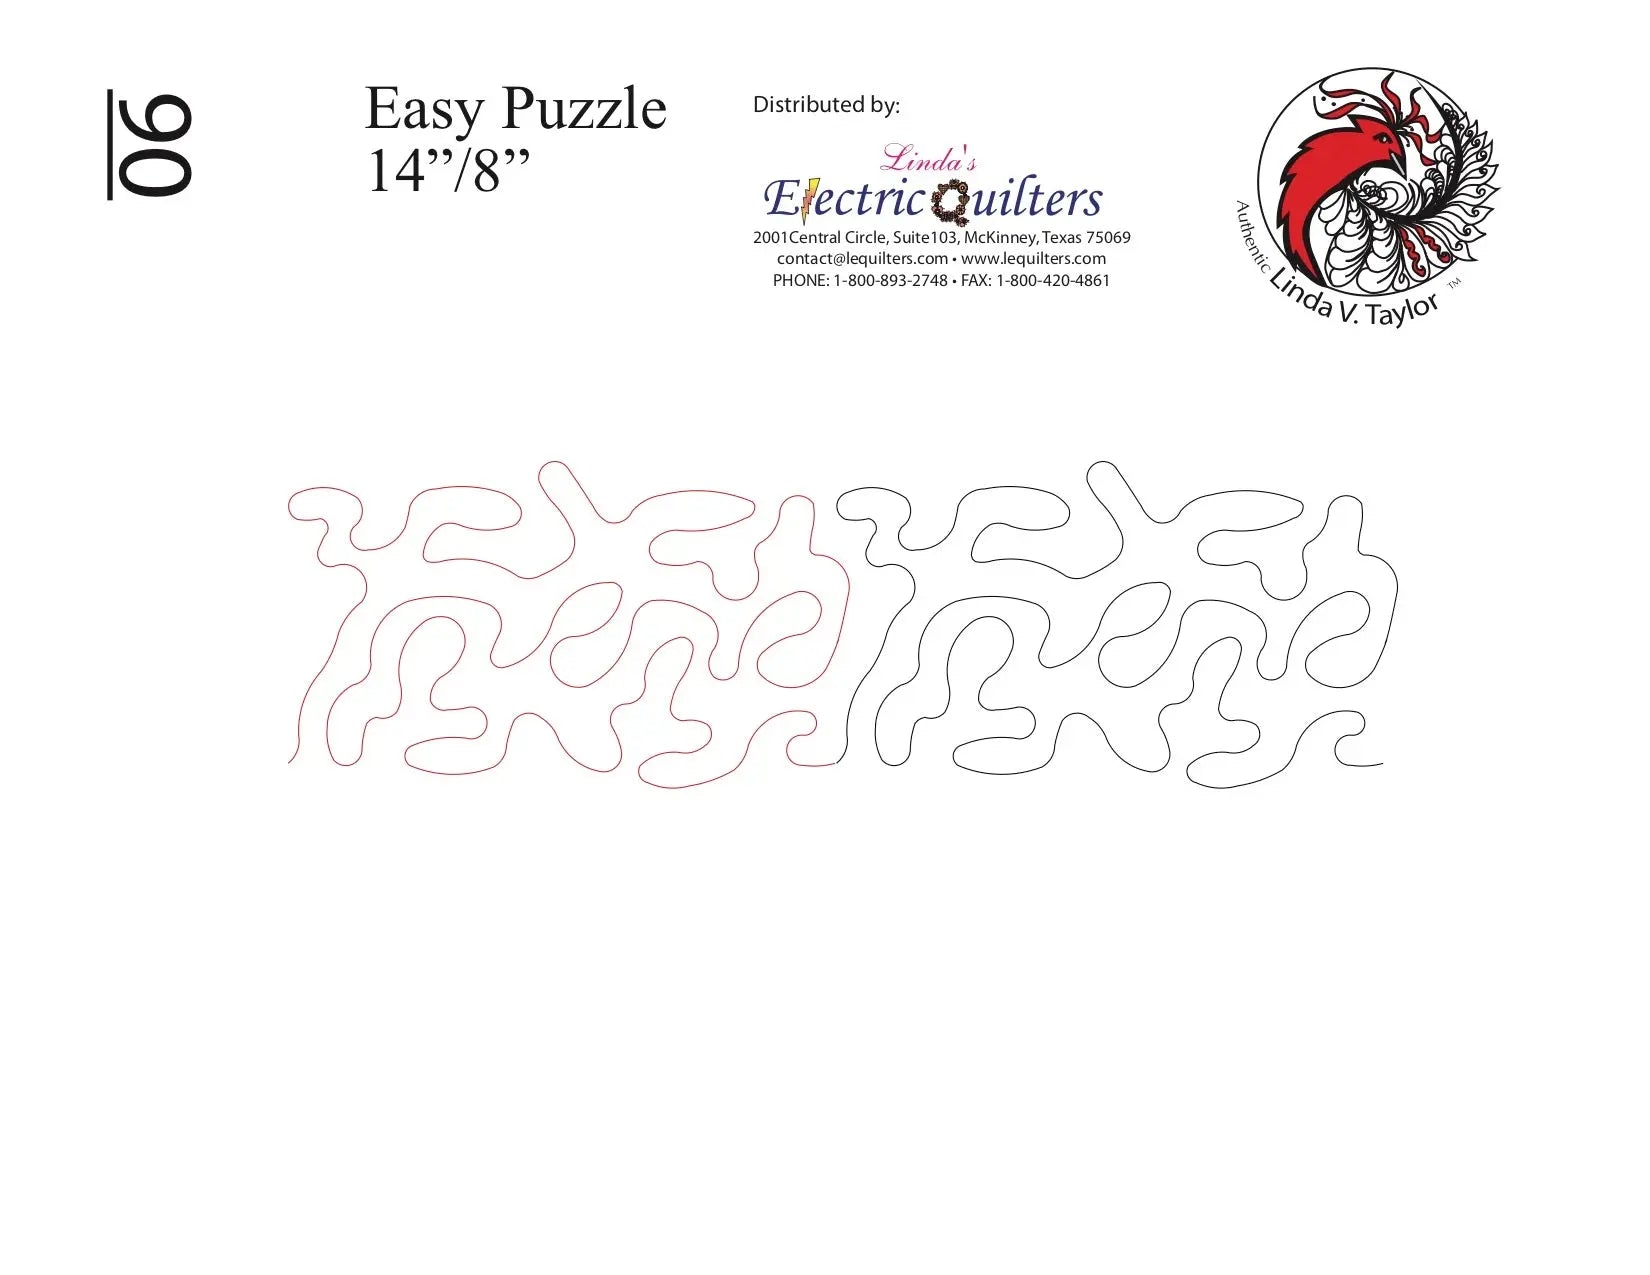 090 Easy Puzzle Pantograph by Linda V. Taylor - Linda's Electric Quilters